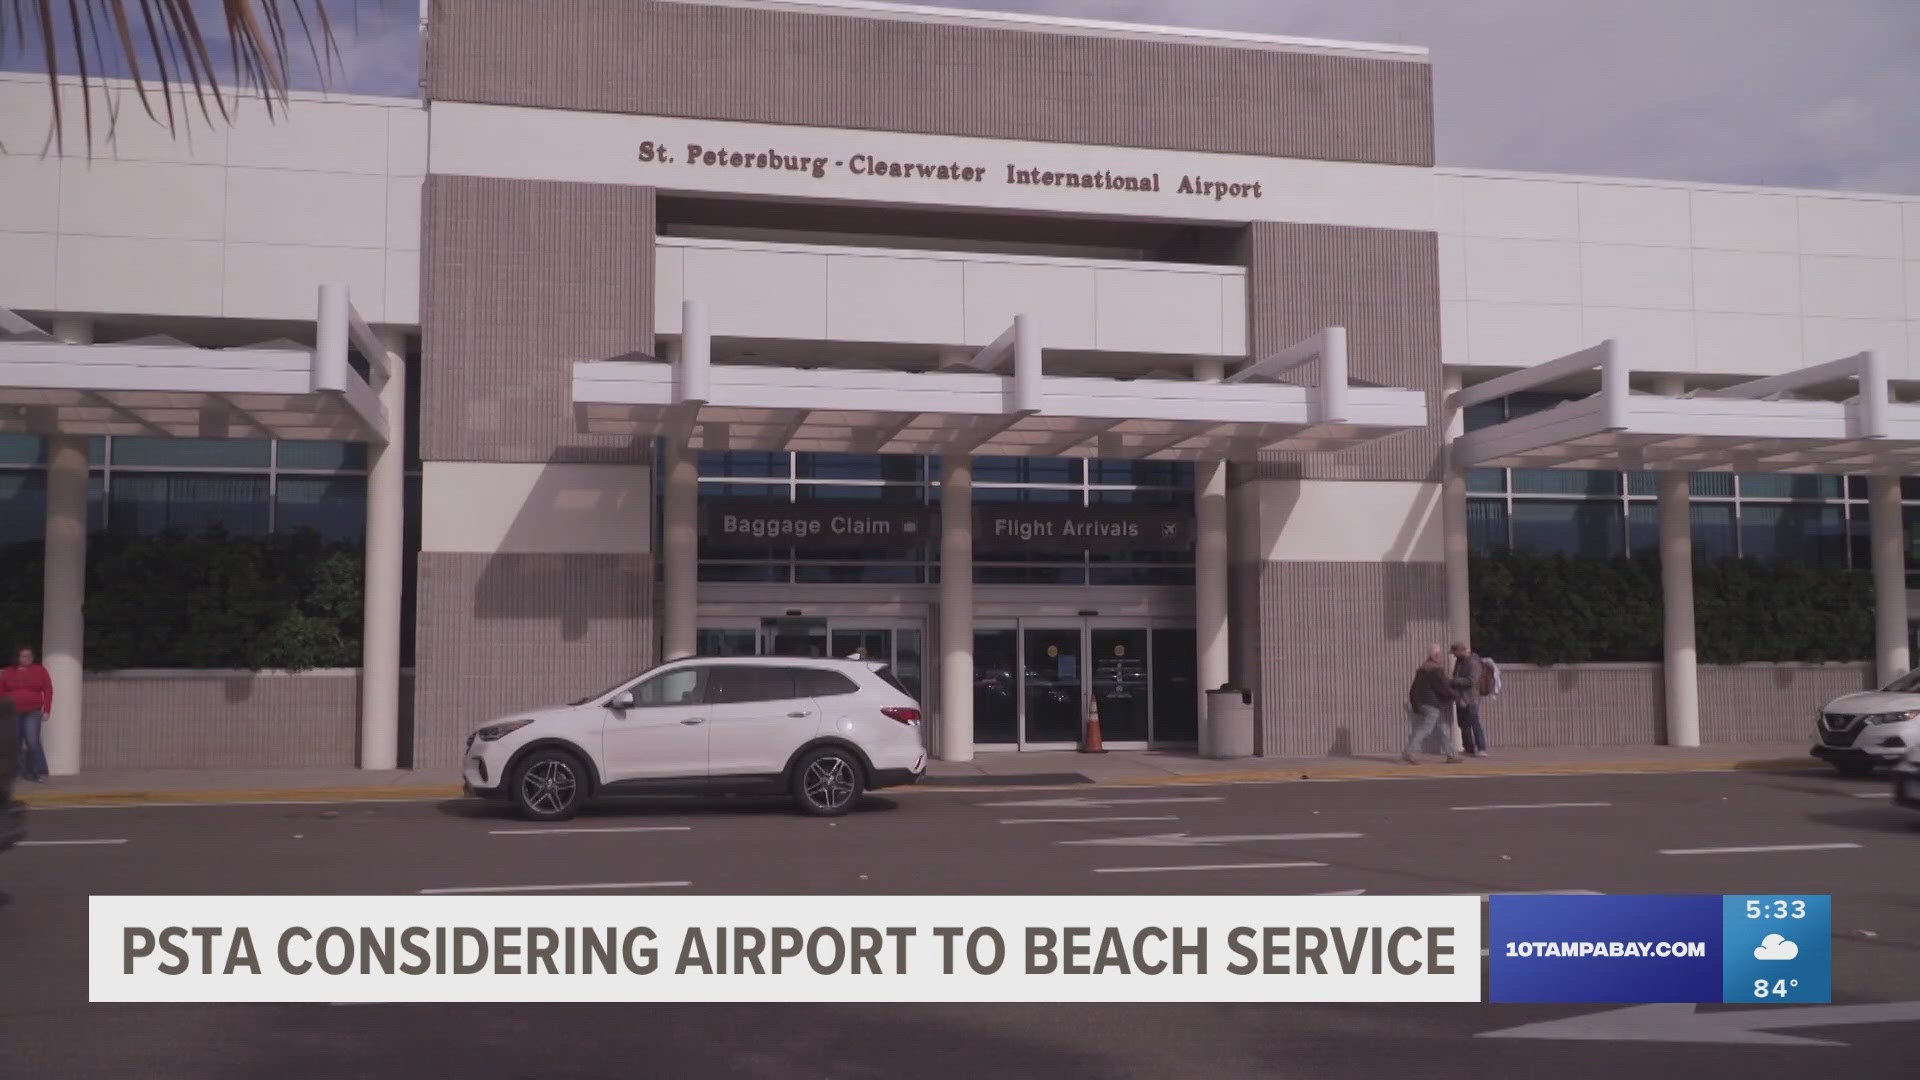 The transportation would run from the airport to Clearwater Beach, and would be the first mode of public transportation from the airport.